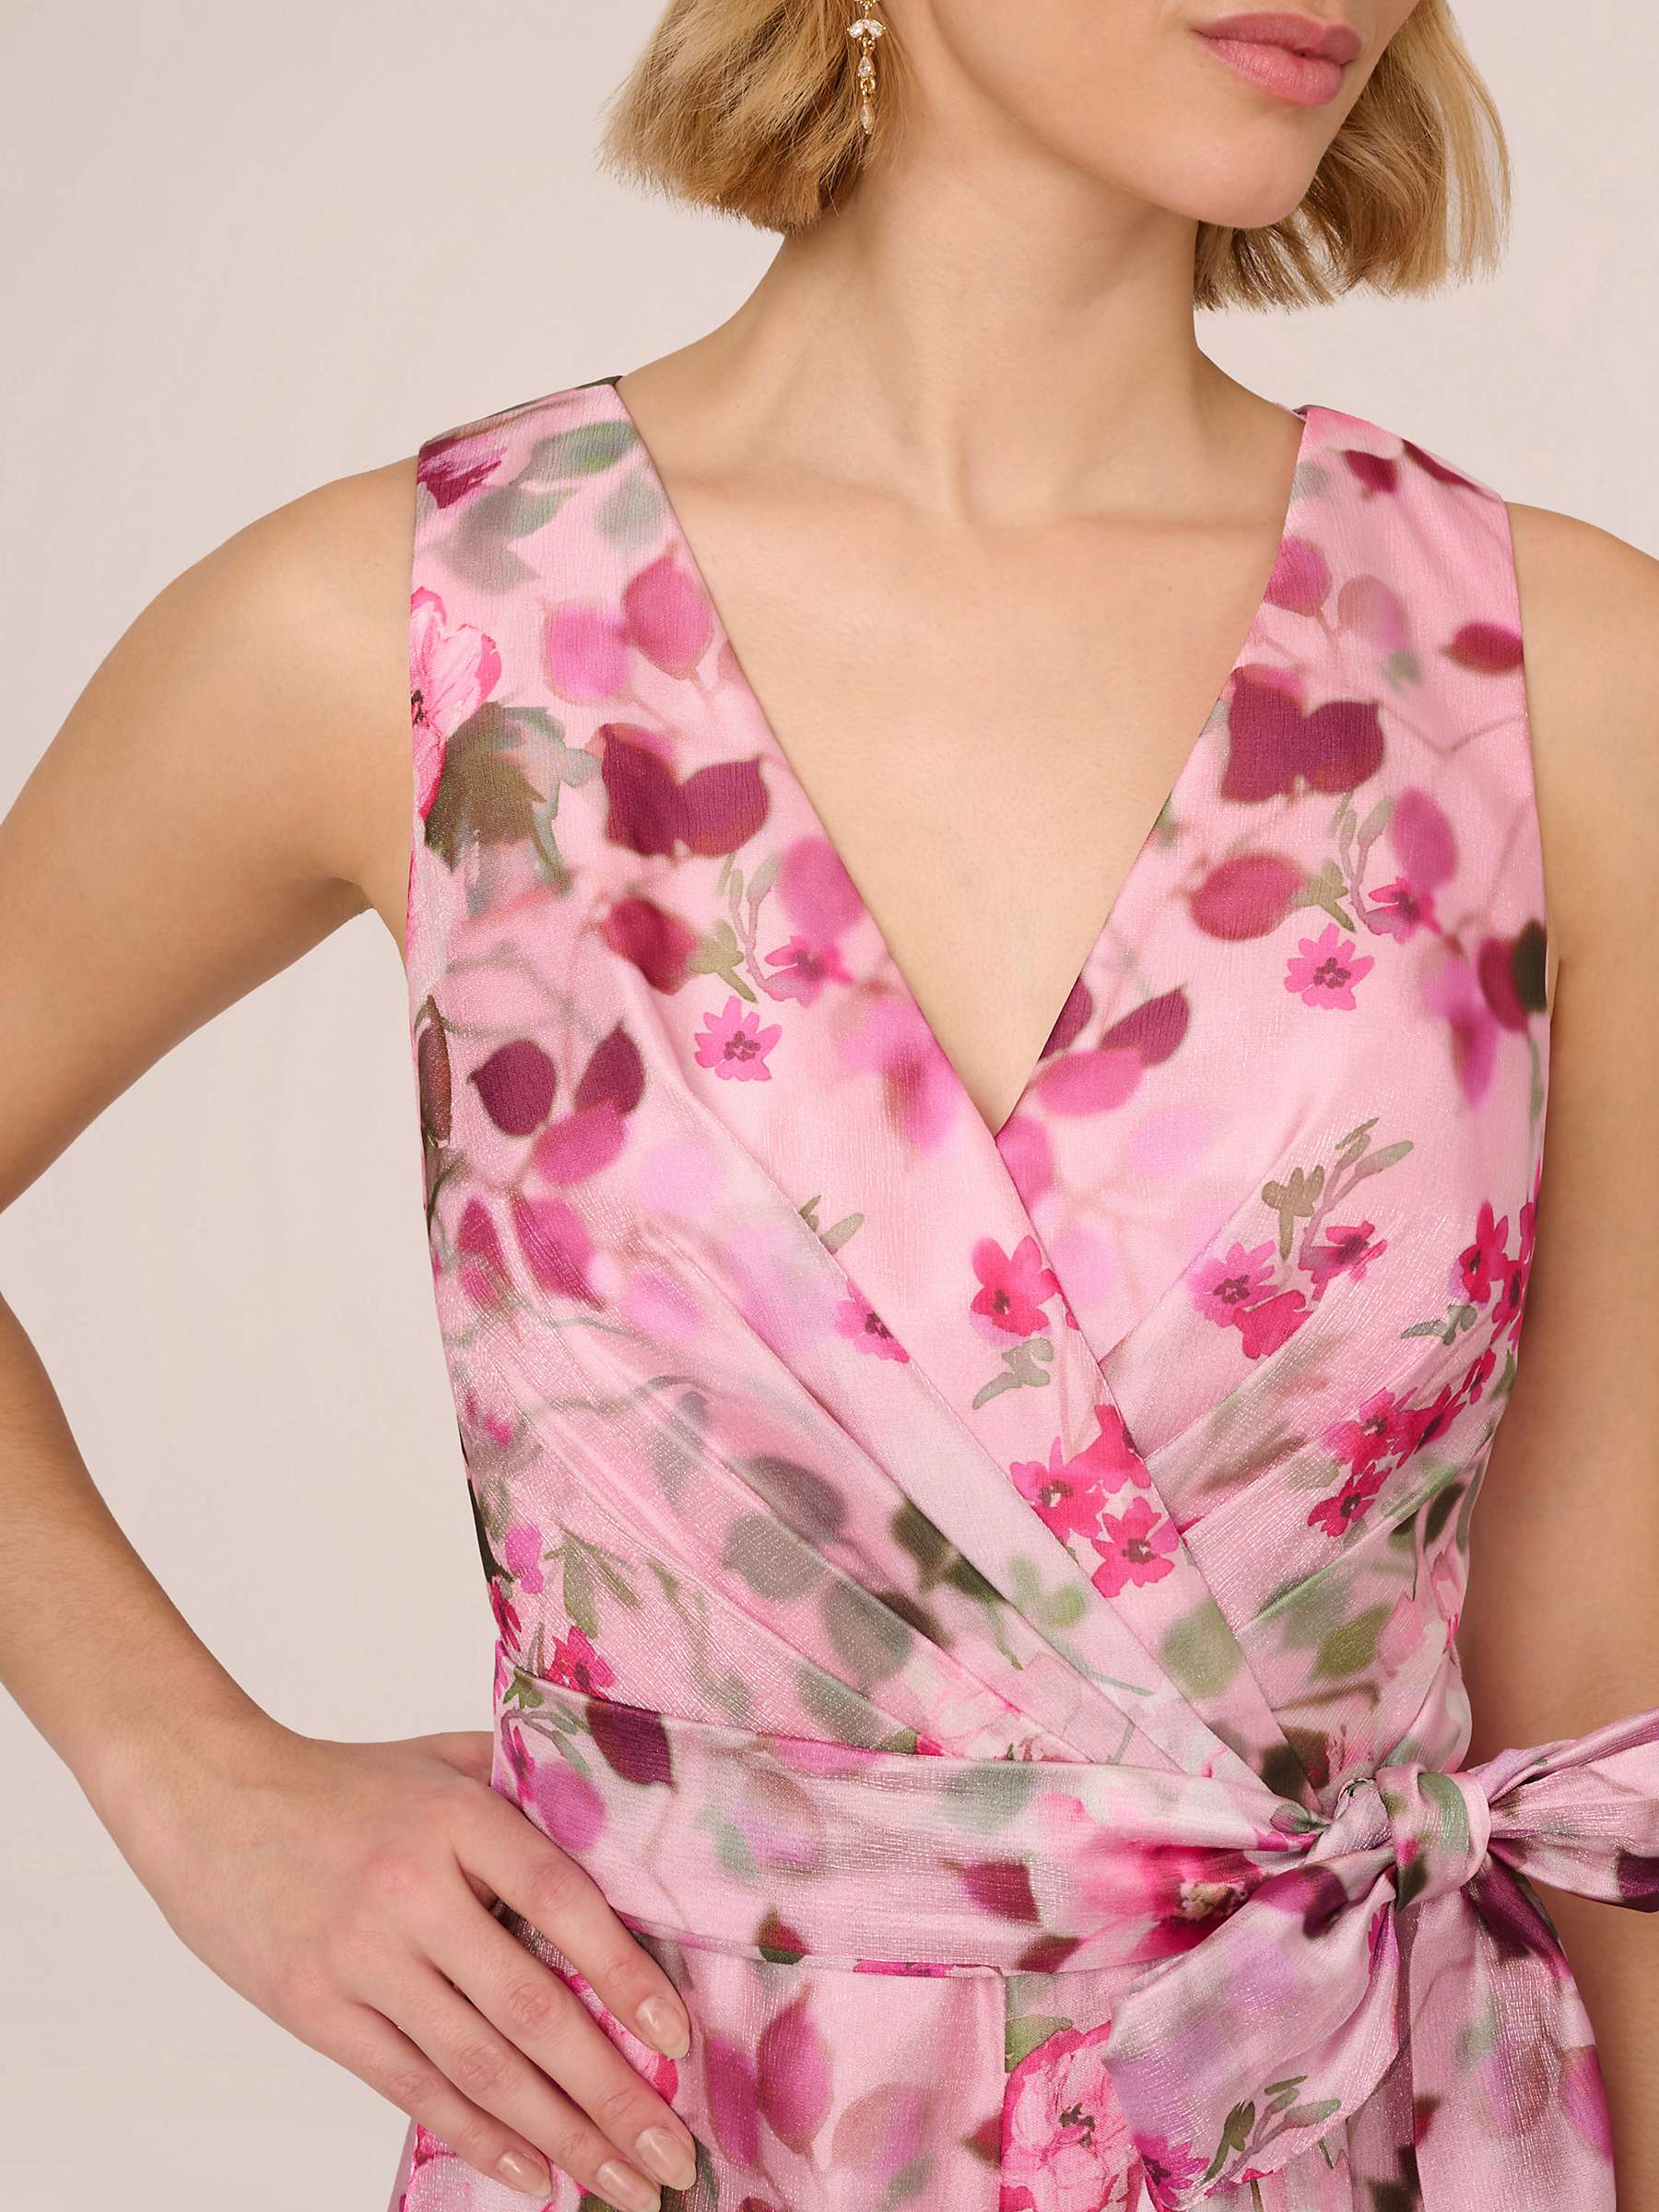 Buy Adrianna Papell Floral Sleeveless Jumpsuit, Pink/Multi Online at johnlewis.com